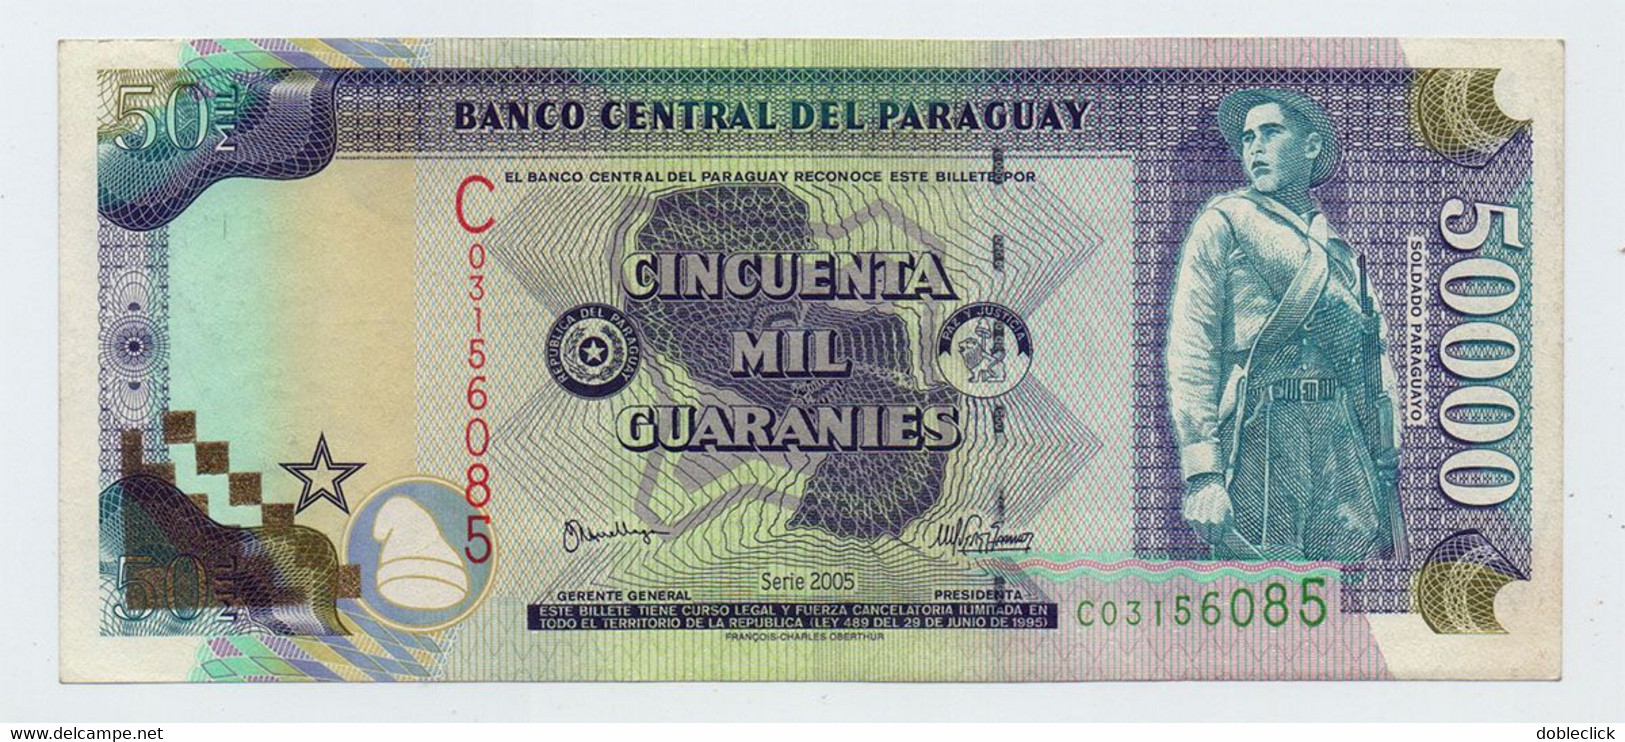 PARAGUAY - 50000 GUARANIES NOTE SERIES C NEVER ISSUED 2005 AU - Paraguay